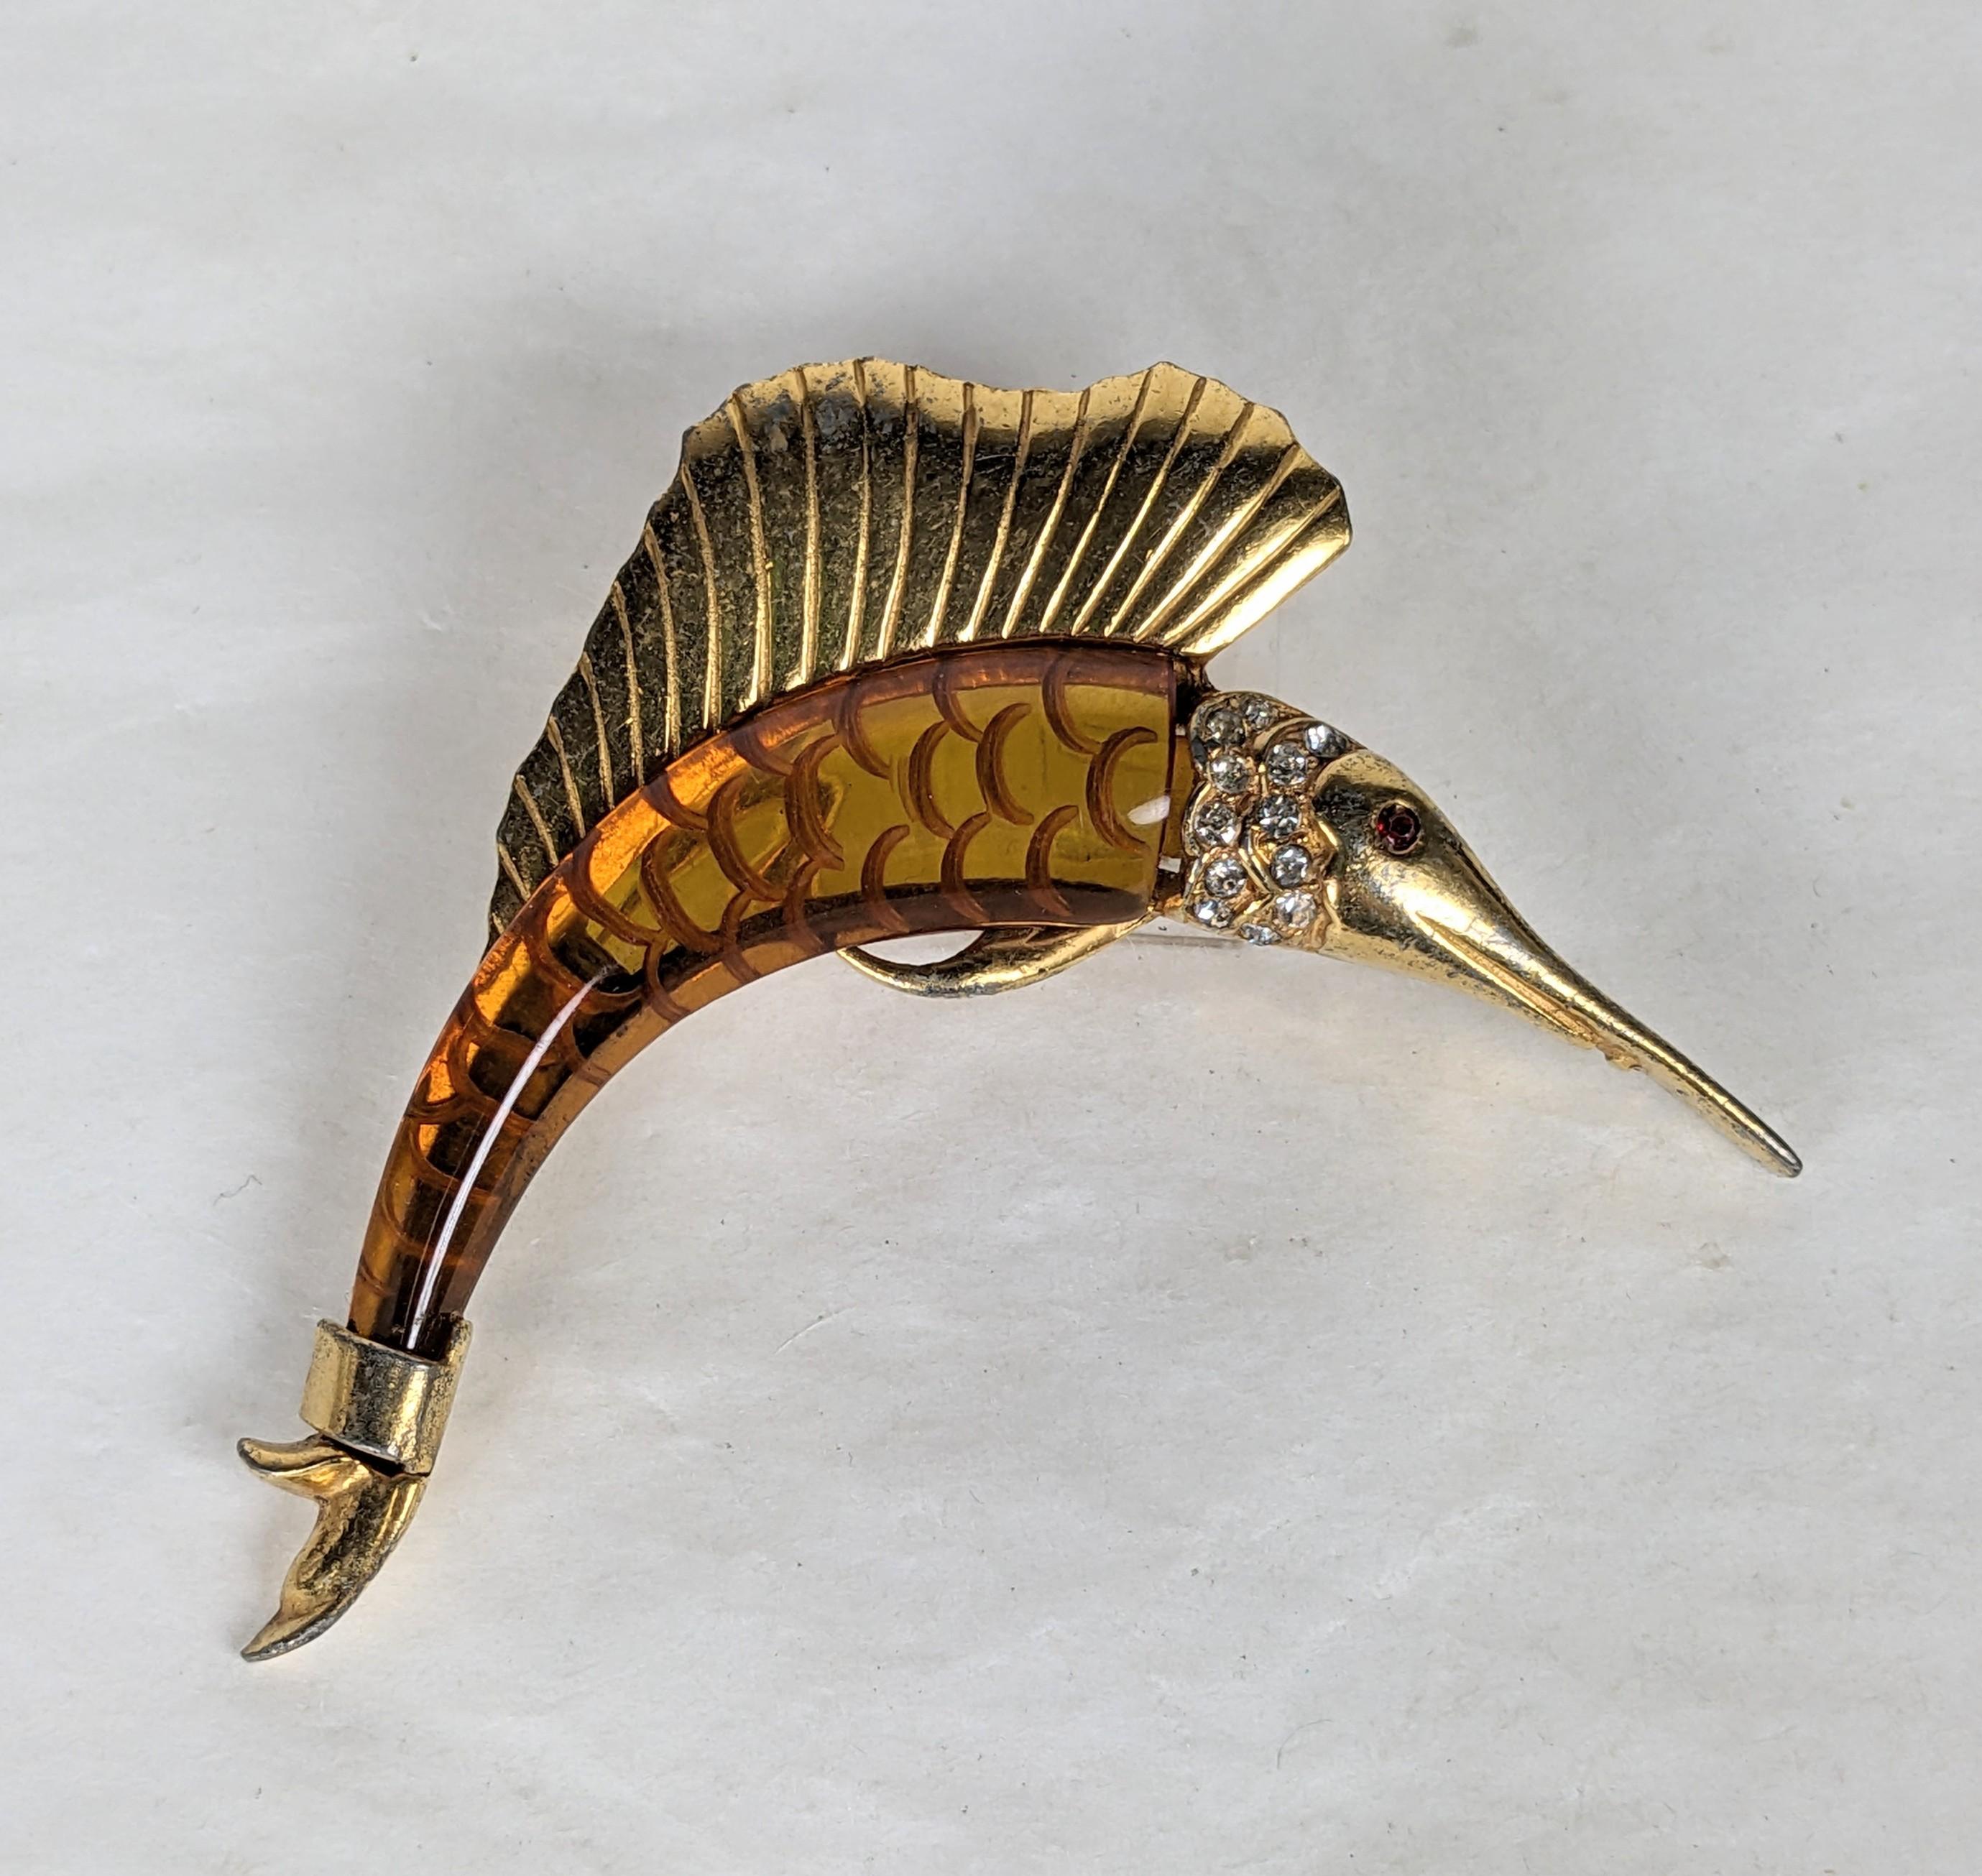 Unusual Art Deco Bakelite Sailfish Brooch of gilt metal with pave accents. Body of fish is reverse carved applejuice bakelite in an amber tone. 1930's USA. 2.75